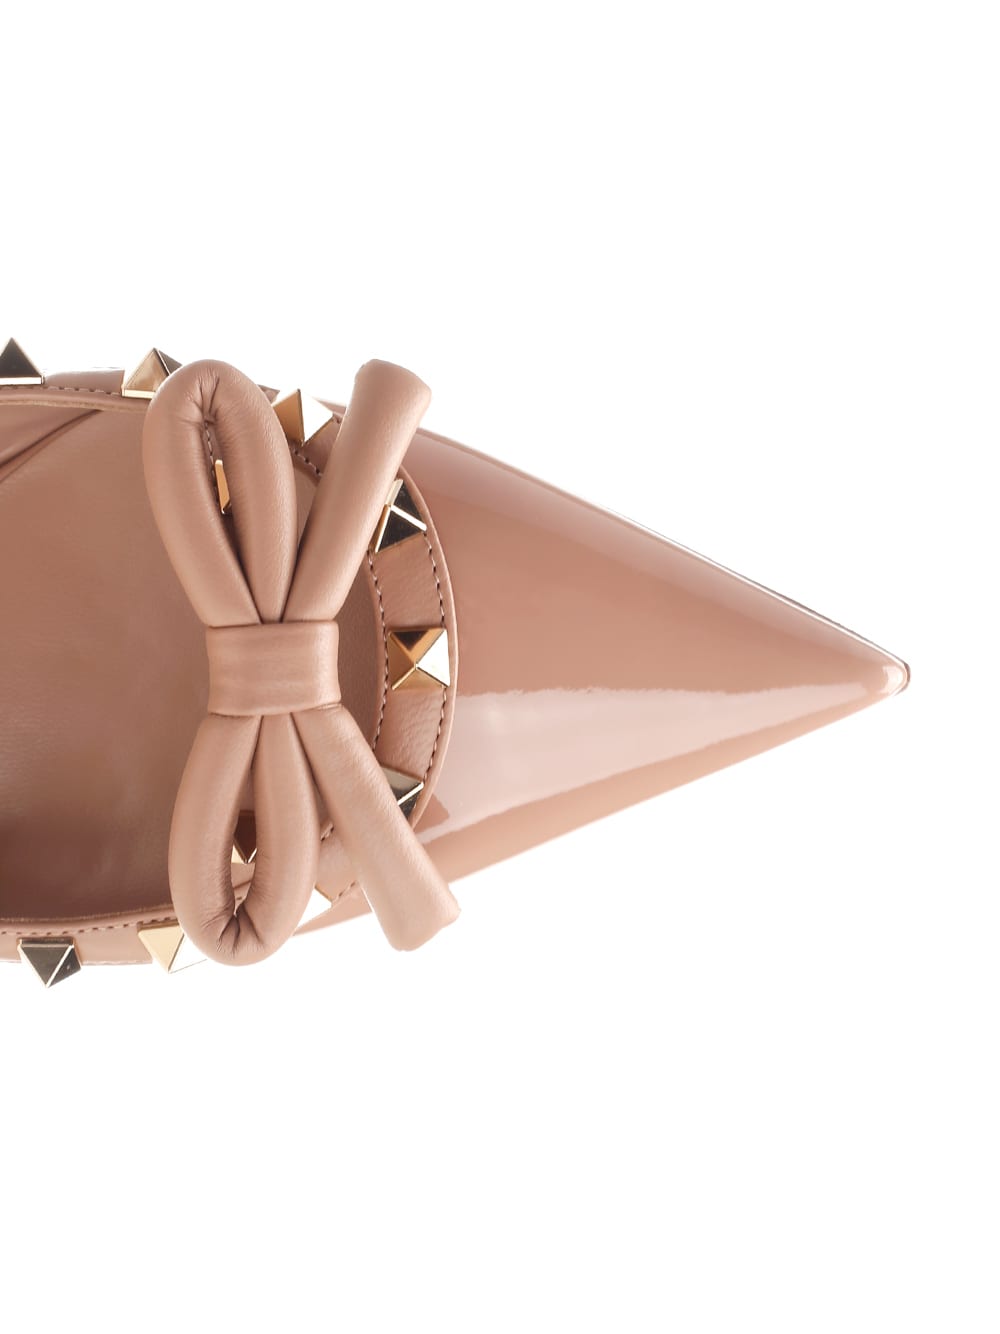 Shop Valentino Patent Leather Sling Back In Powder